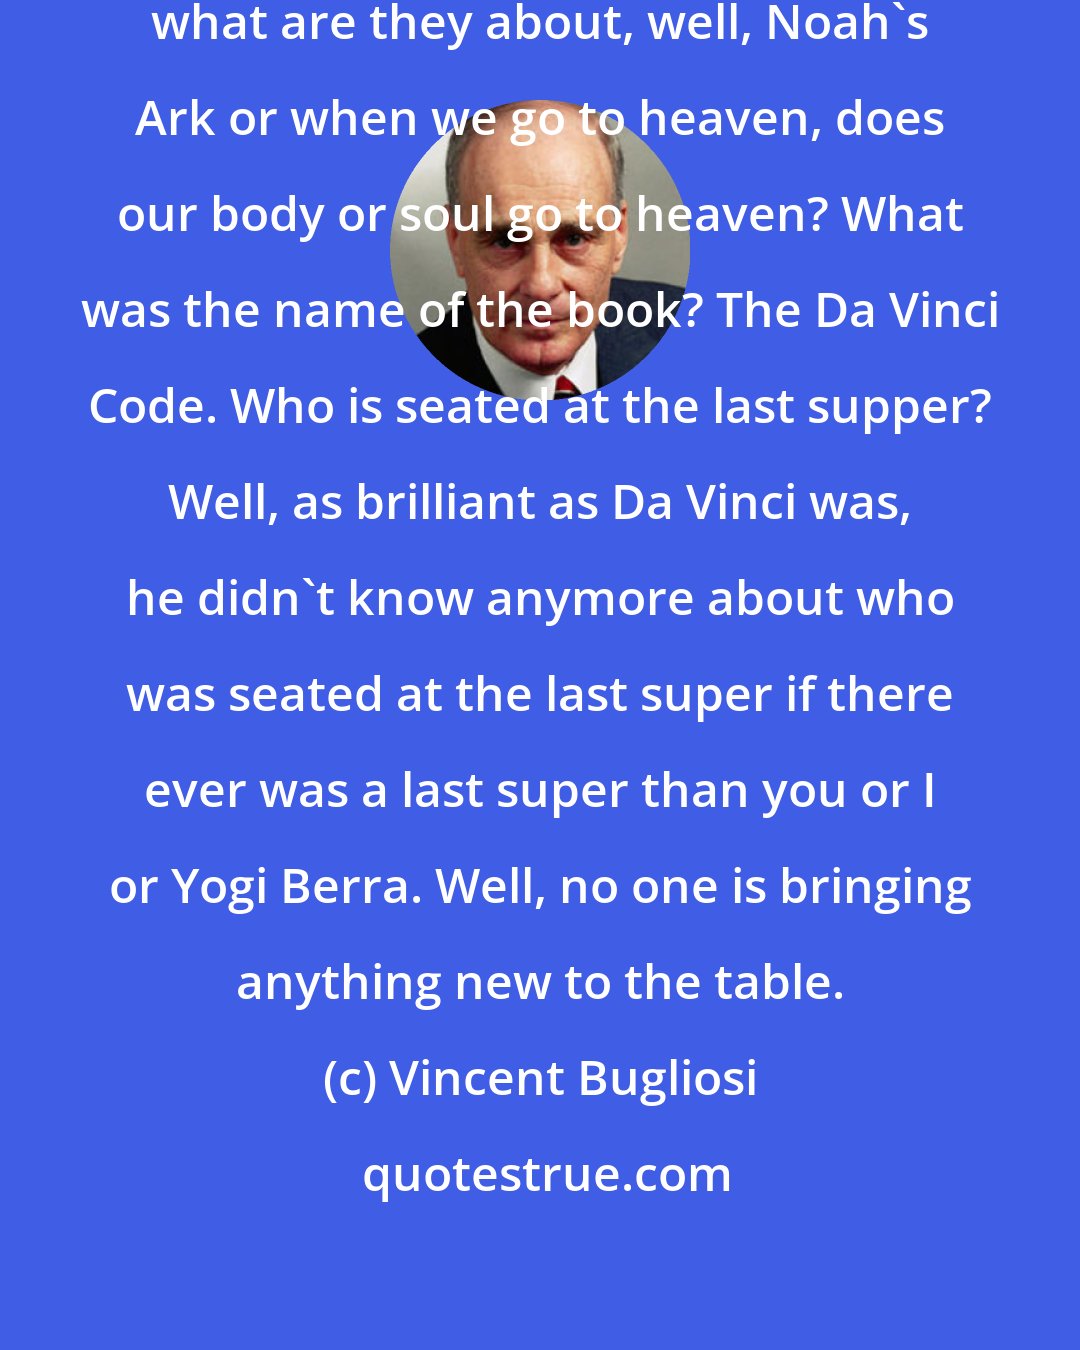 Vincent Bugliosi: When books come out on religion today, what are they about, well, Noah's Ark or when we go to heaven, does our body or soul go to heaven? What was the name of the book? The Da Vinci Code. Who is seated at the last supper? Well, as brilliant as Da Vinci was, he didn't know anymore about who was seated at the last super if there ever was a last super than you or I or Yogi Berra. Well, no one is bringing anything new to the table.